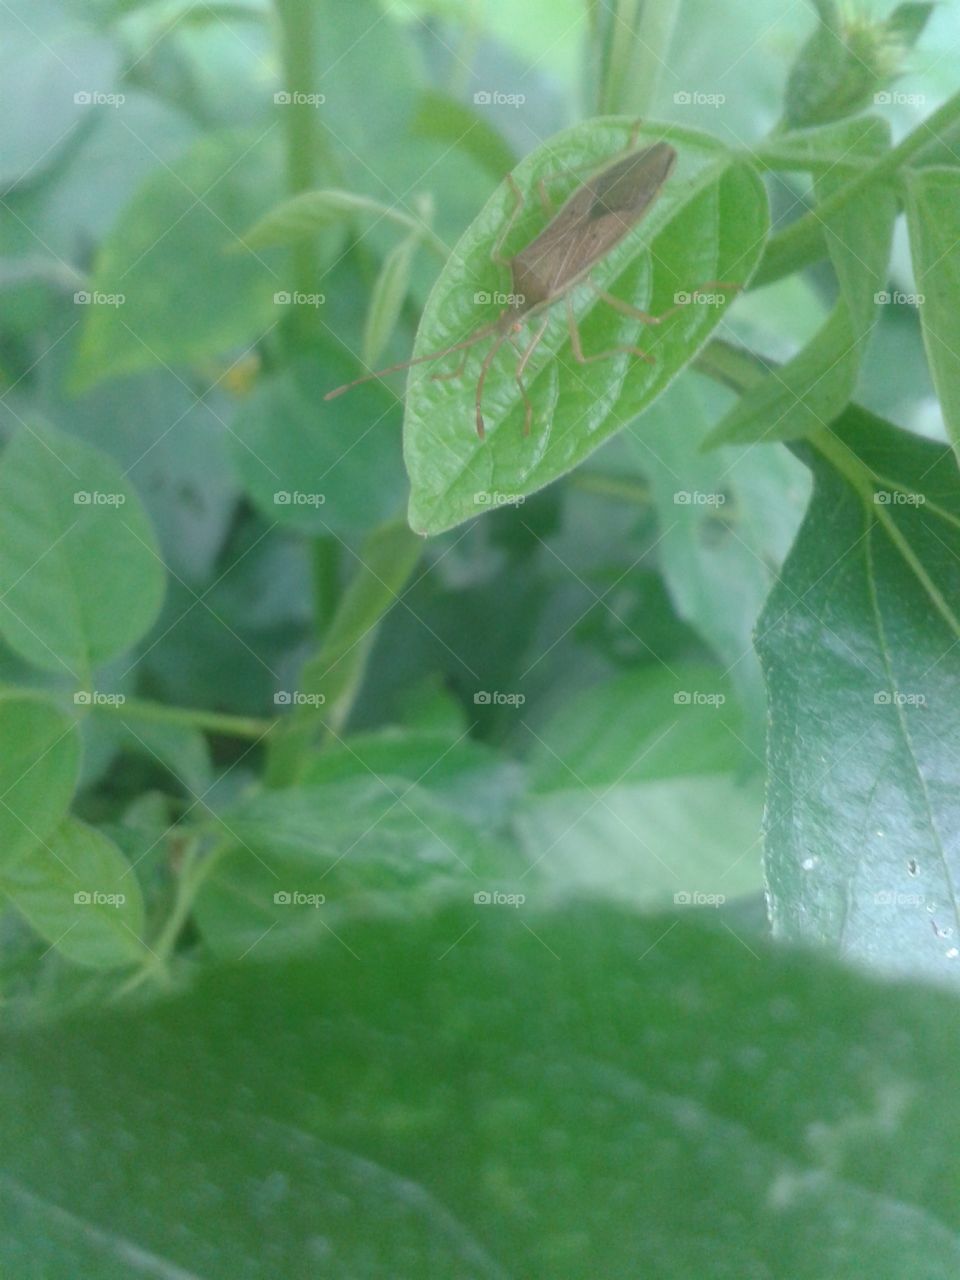 insect on the leaf